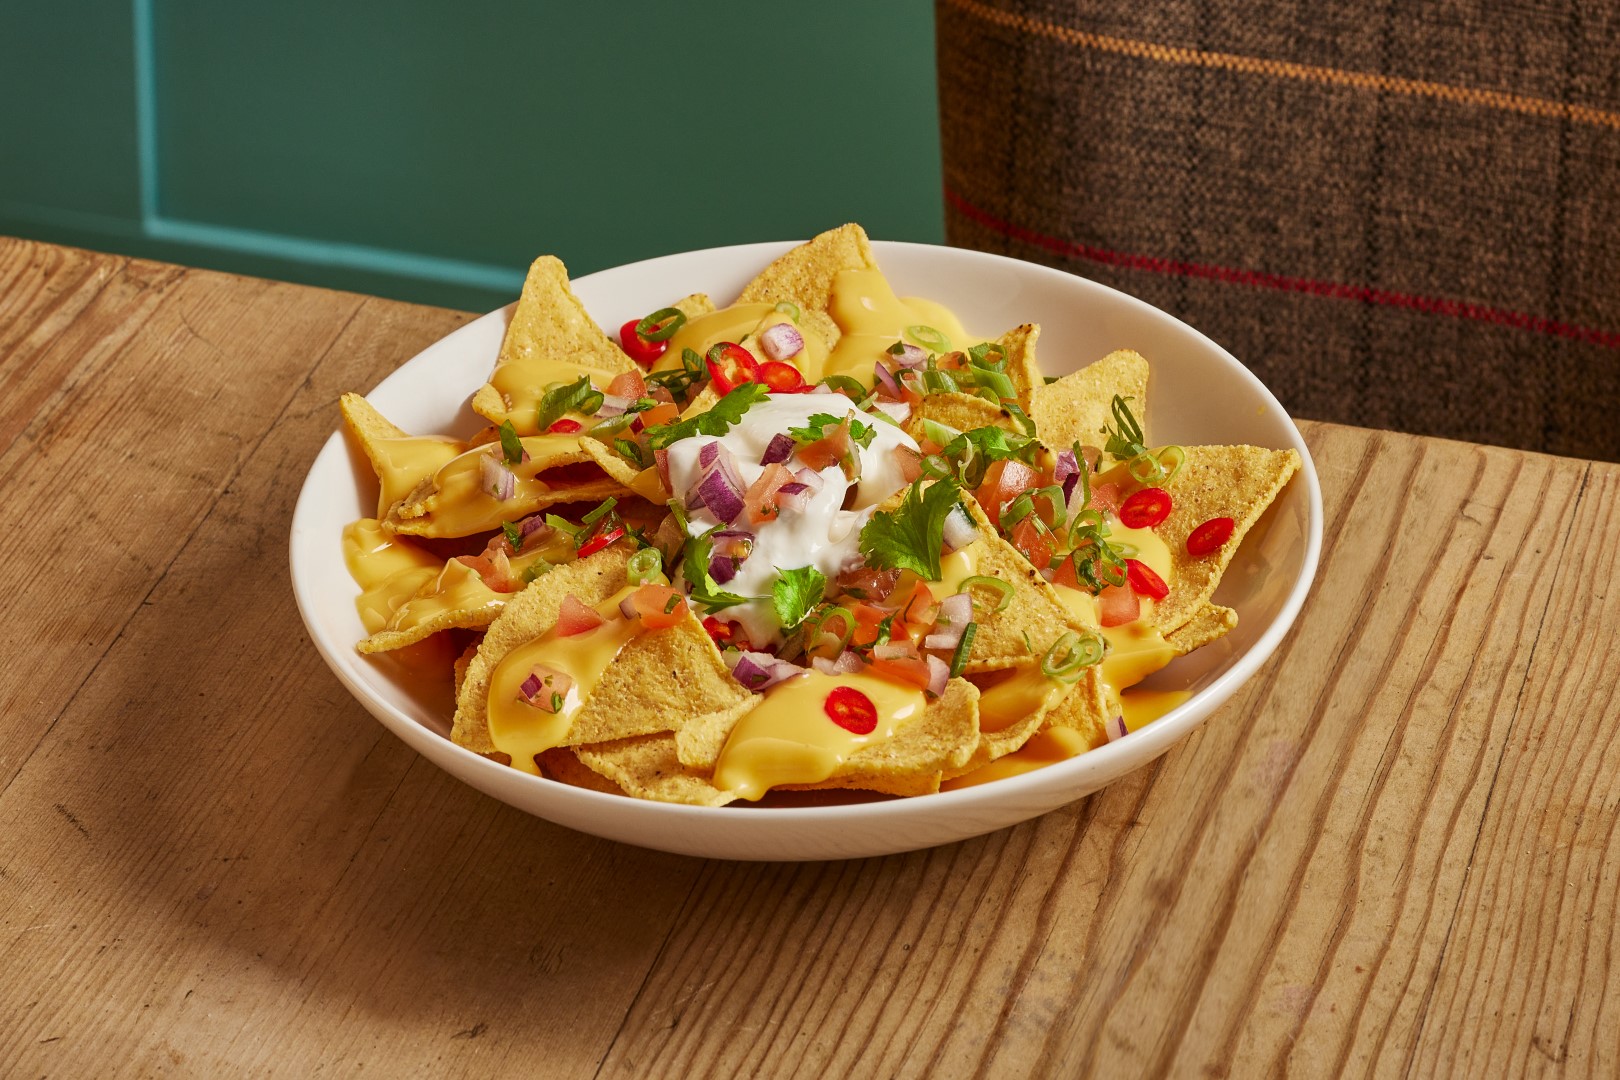 Brewers Fayre Loaded Nachos With cheese, red chillis, tomato salsa and reduced-fat soured cream